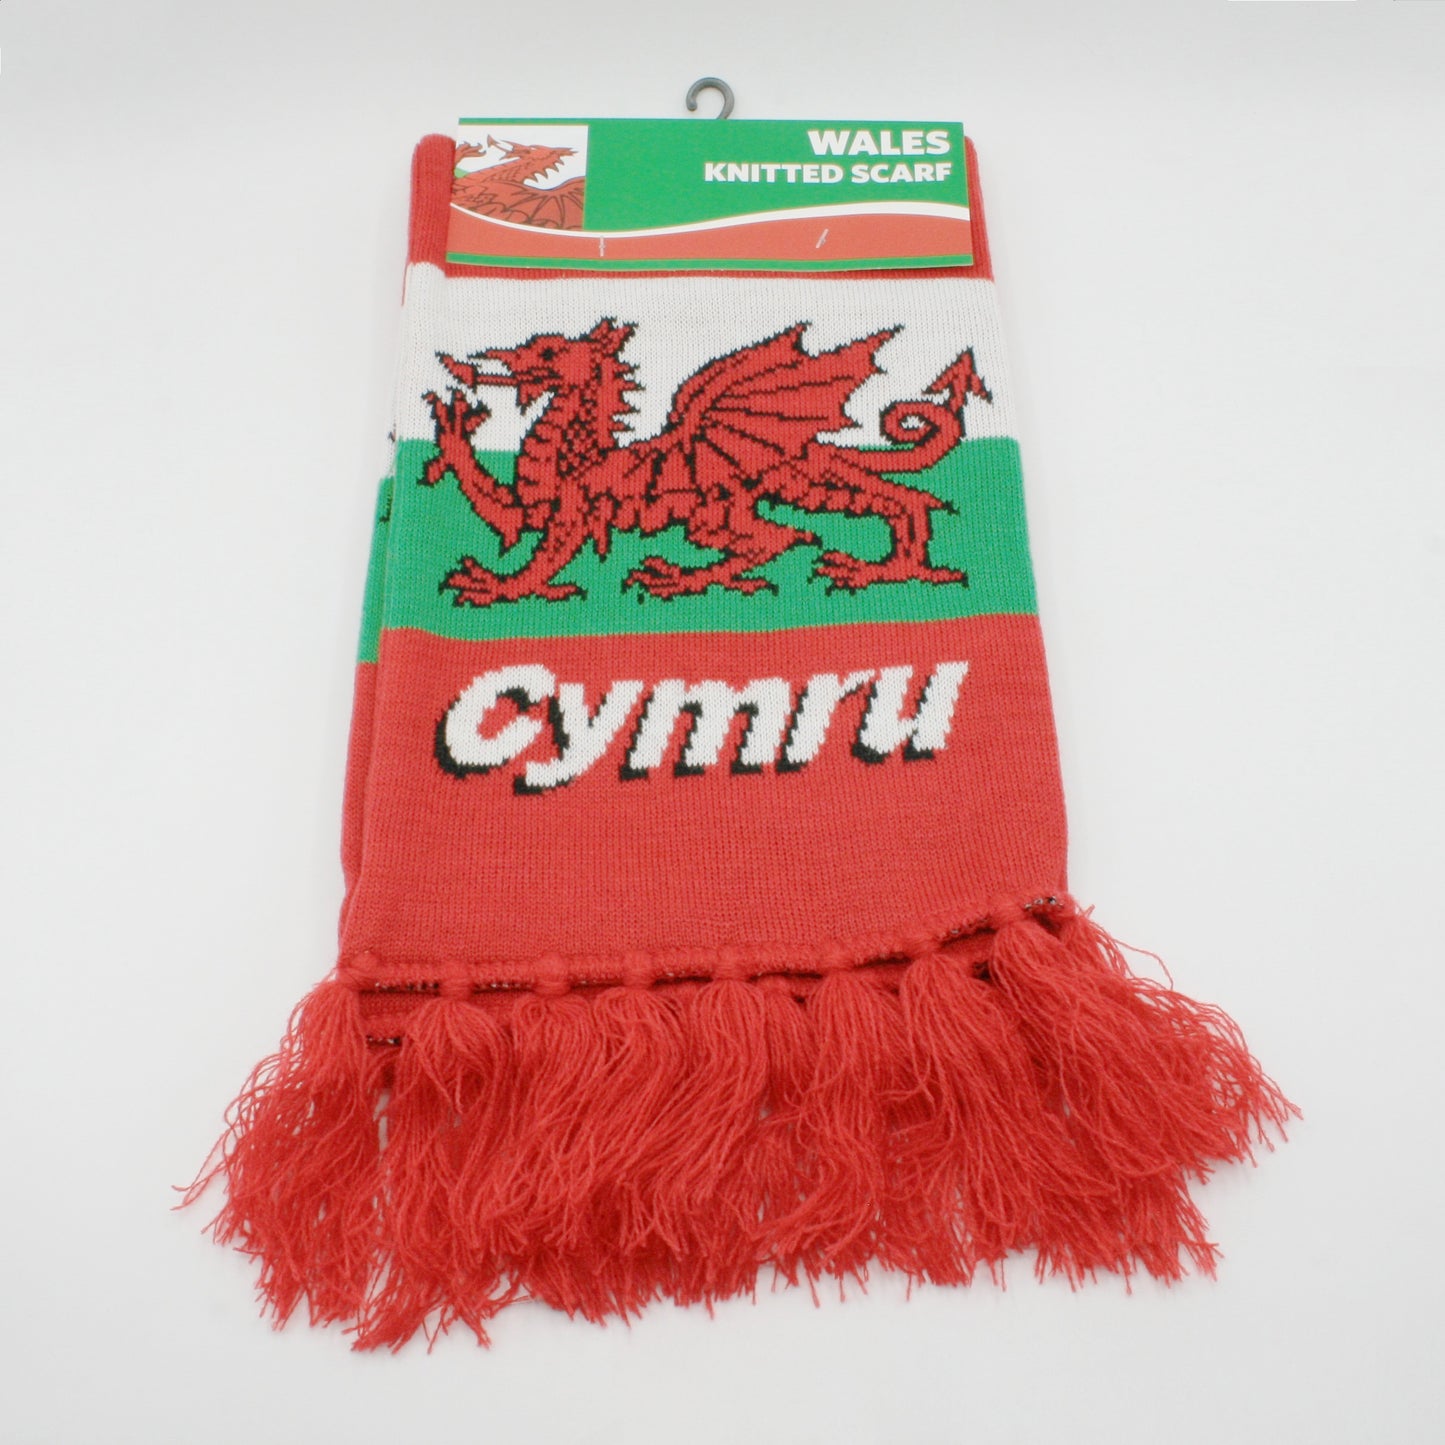 Welsh Knitted Scarf